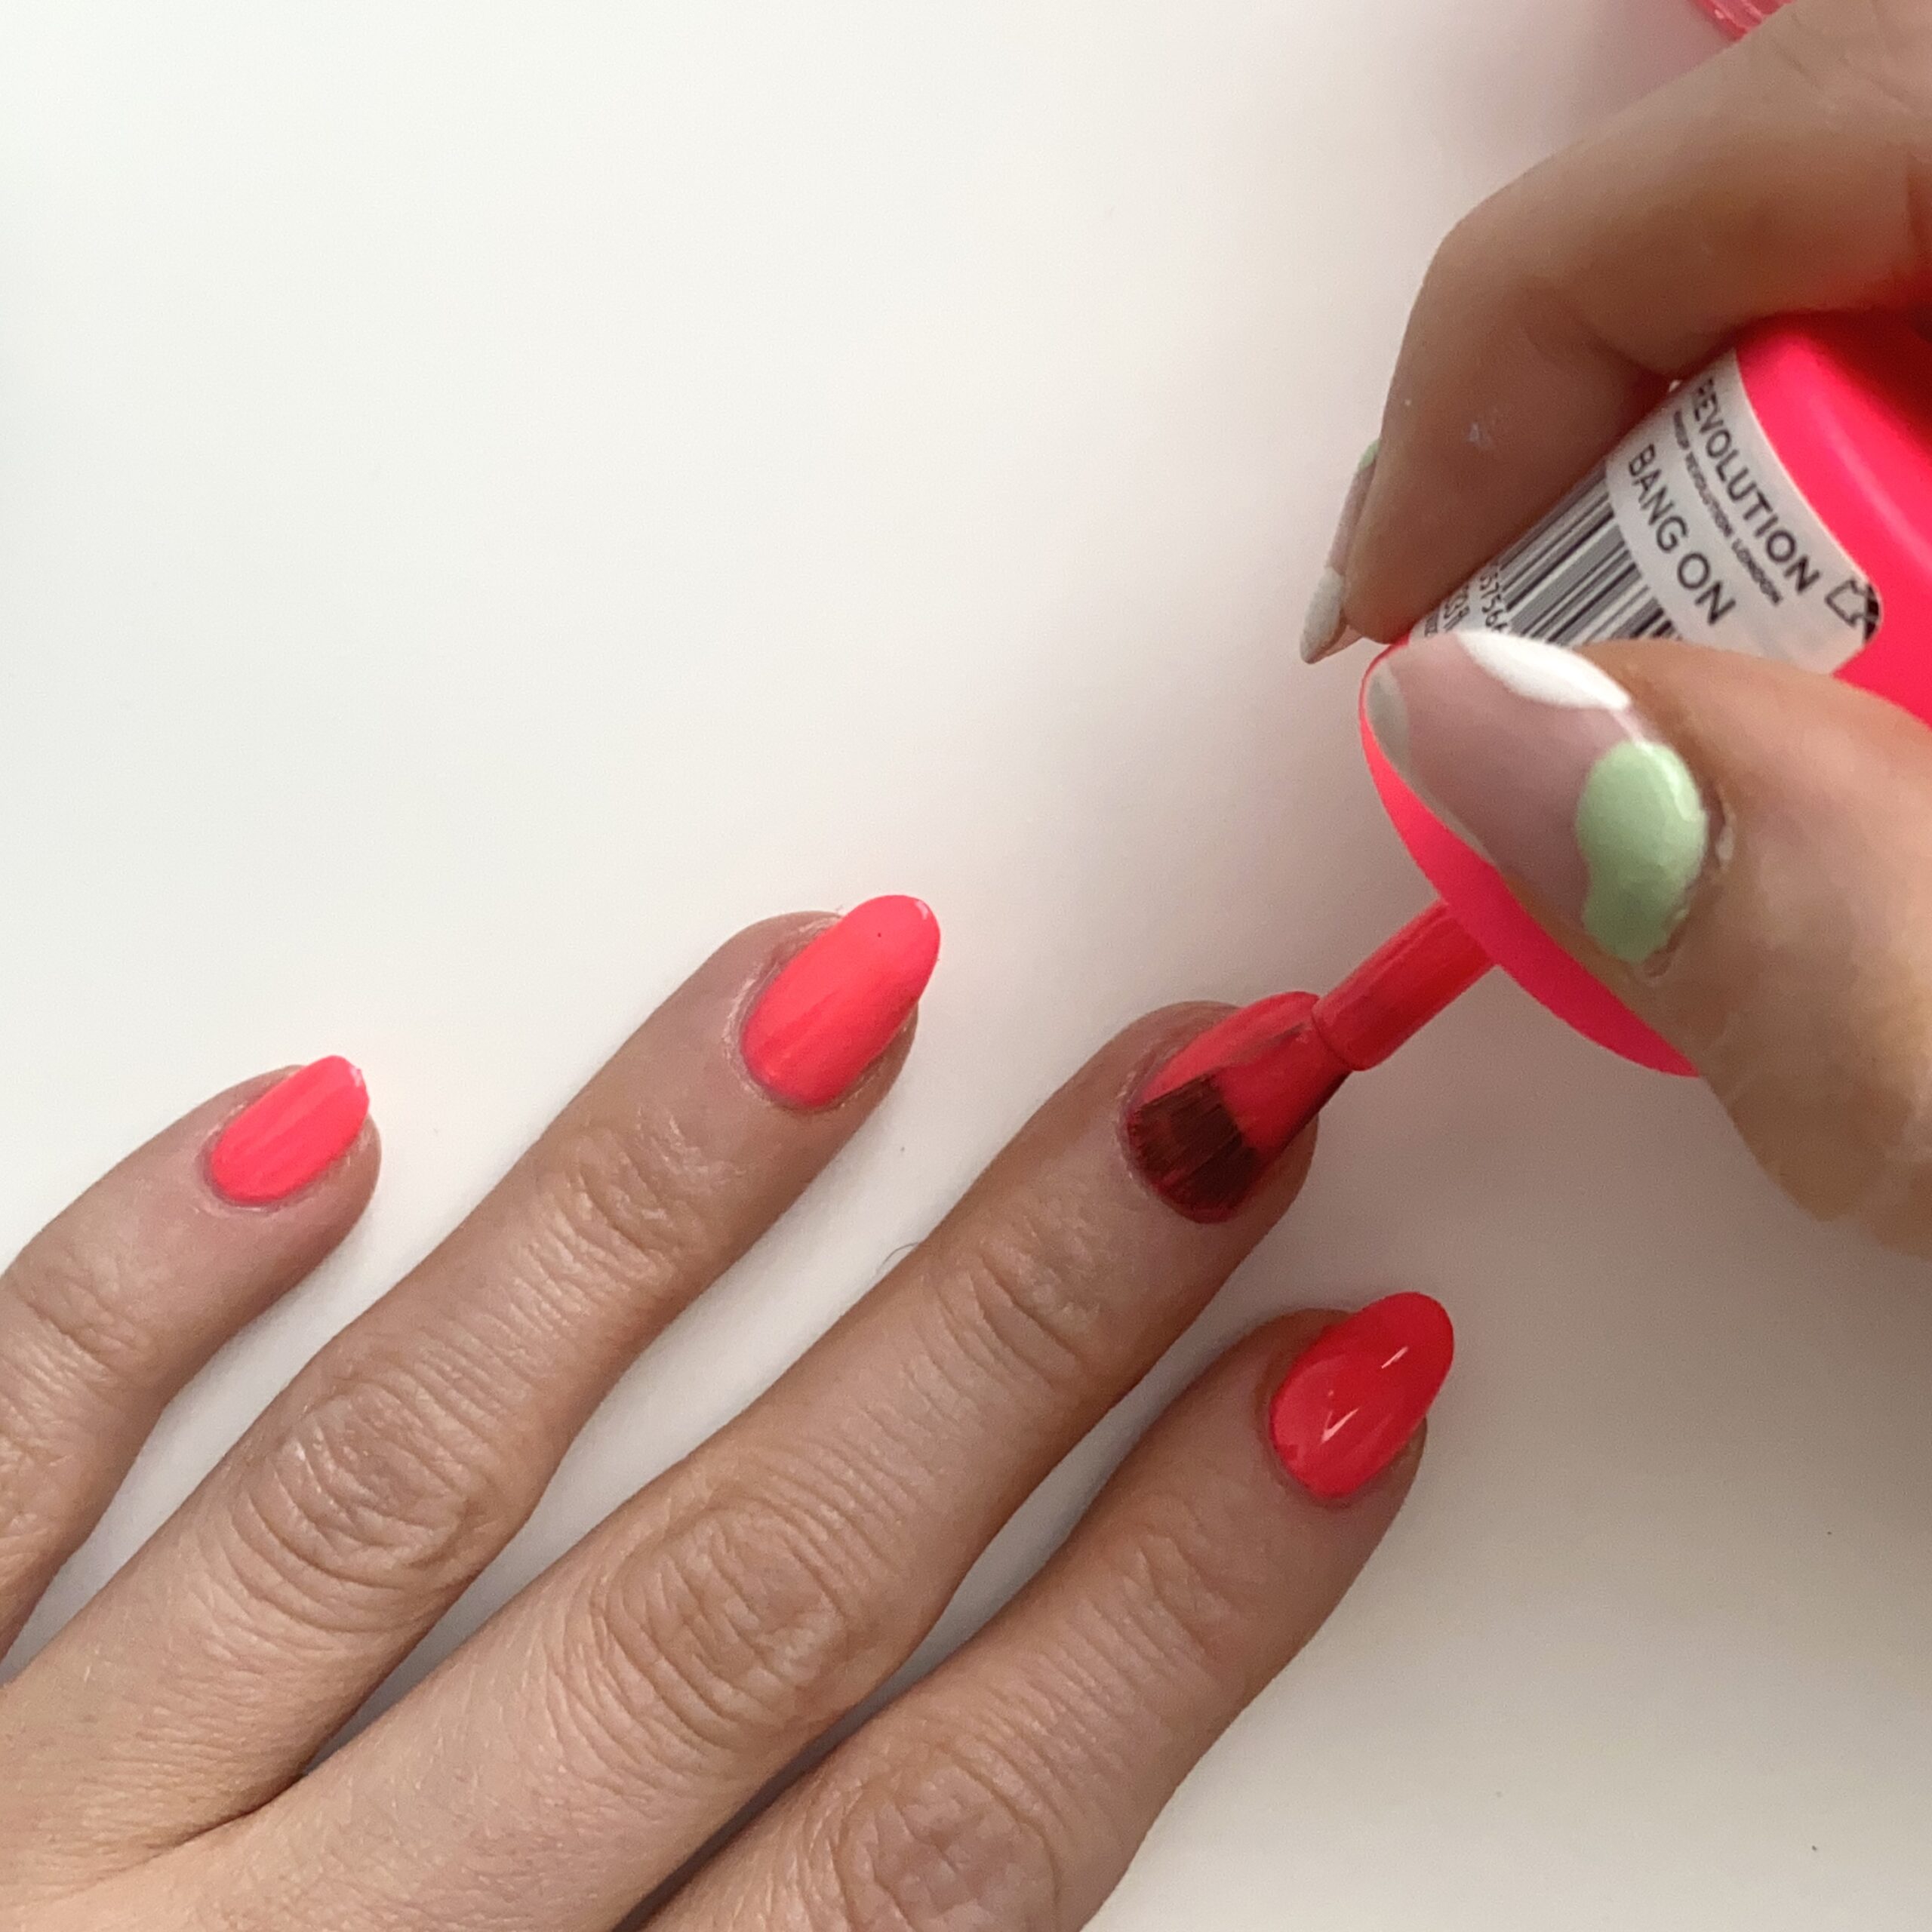 How To Paint Your Nails Perfectly, Every Single Time - Beauty Bay Edited